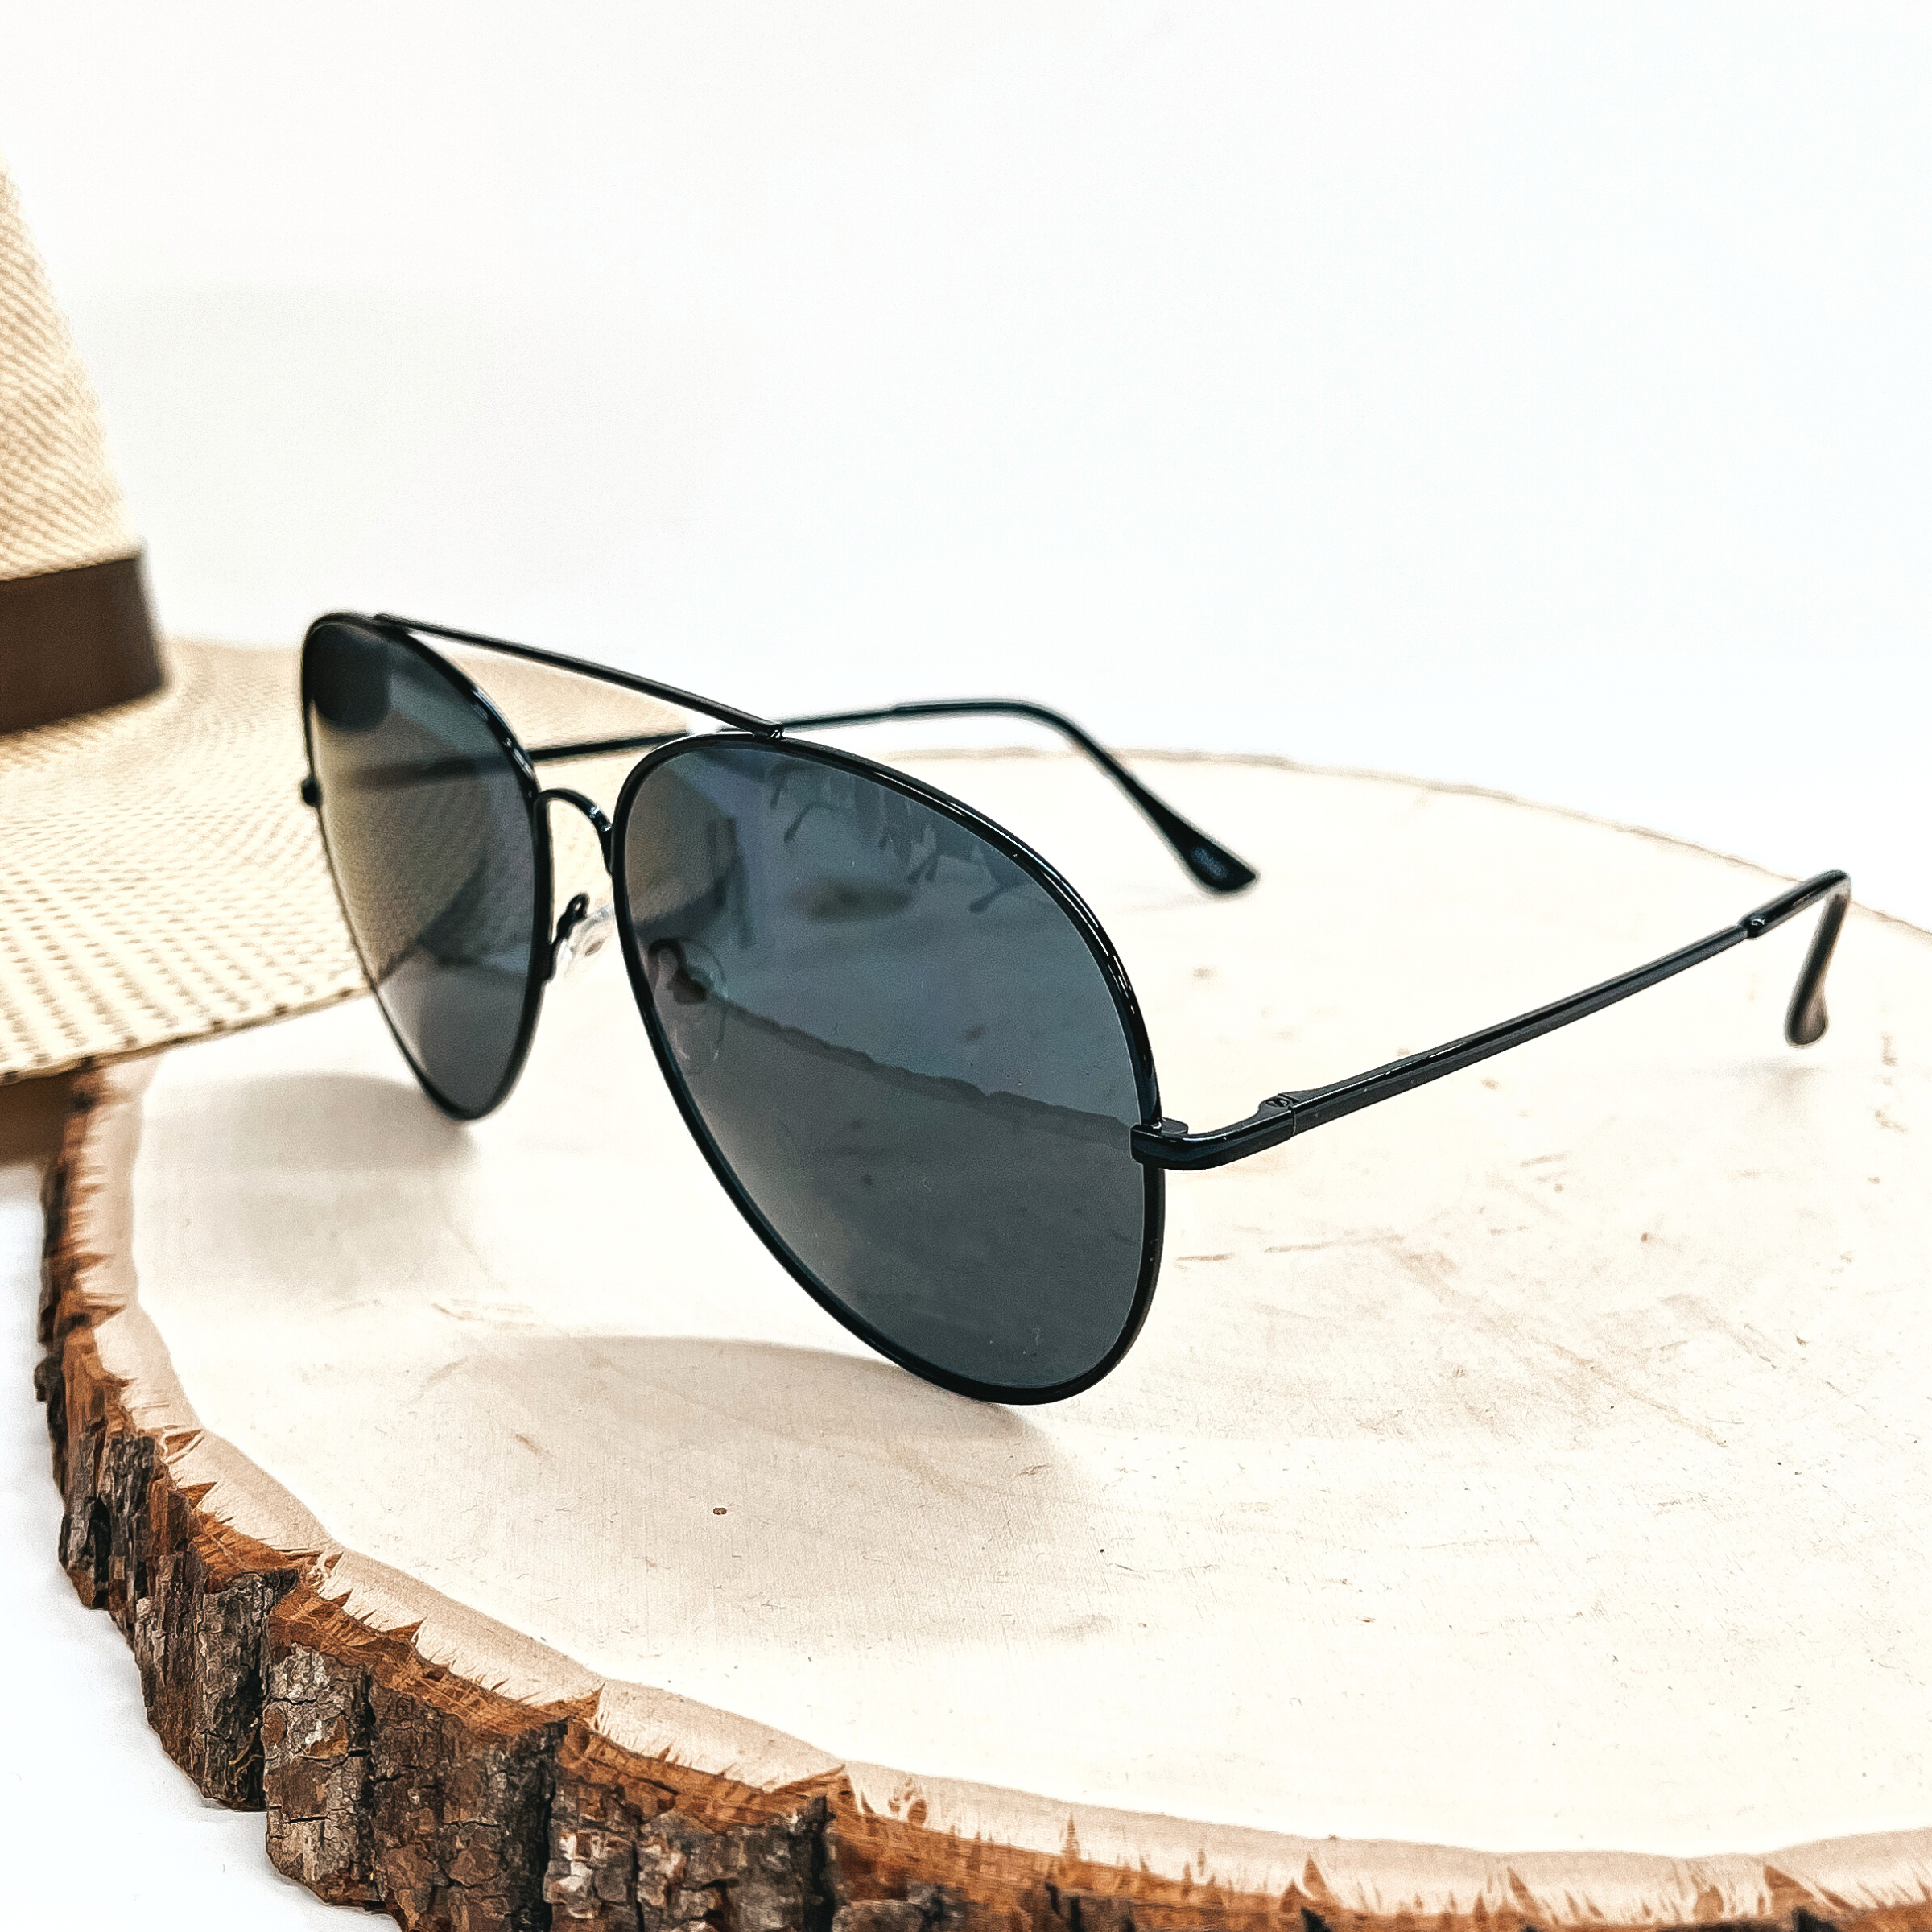 These are aviator style sunglasses with a black lense and a black  outline/frame. These sunglasses are taken on top of a slab of wood with a  straw hat in the back as decor.